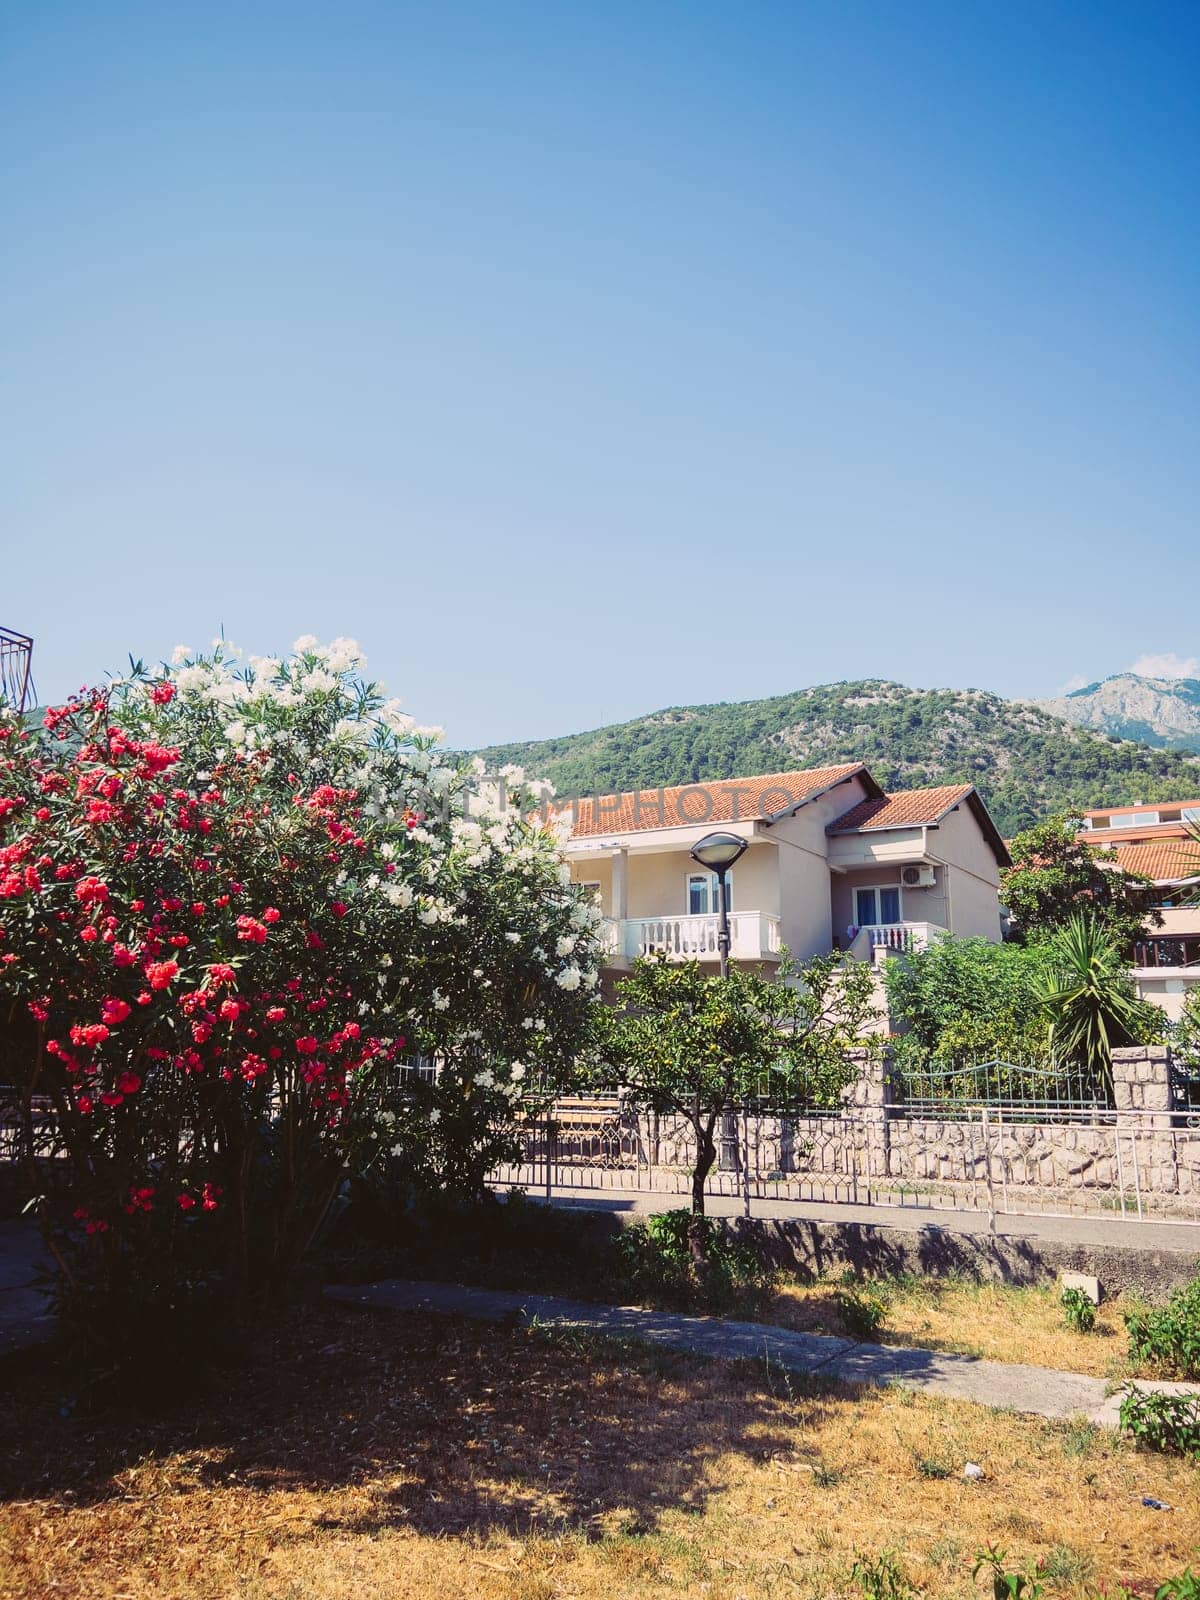 Blooming red and white bushes near the house at the foot of the mountains. High quality photo